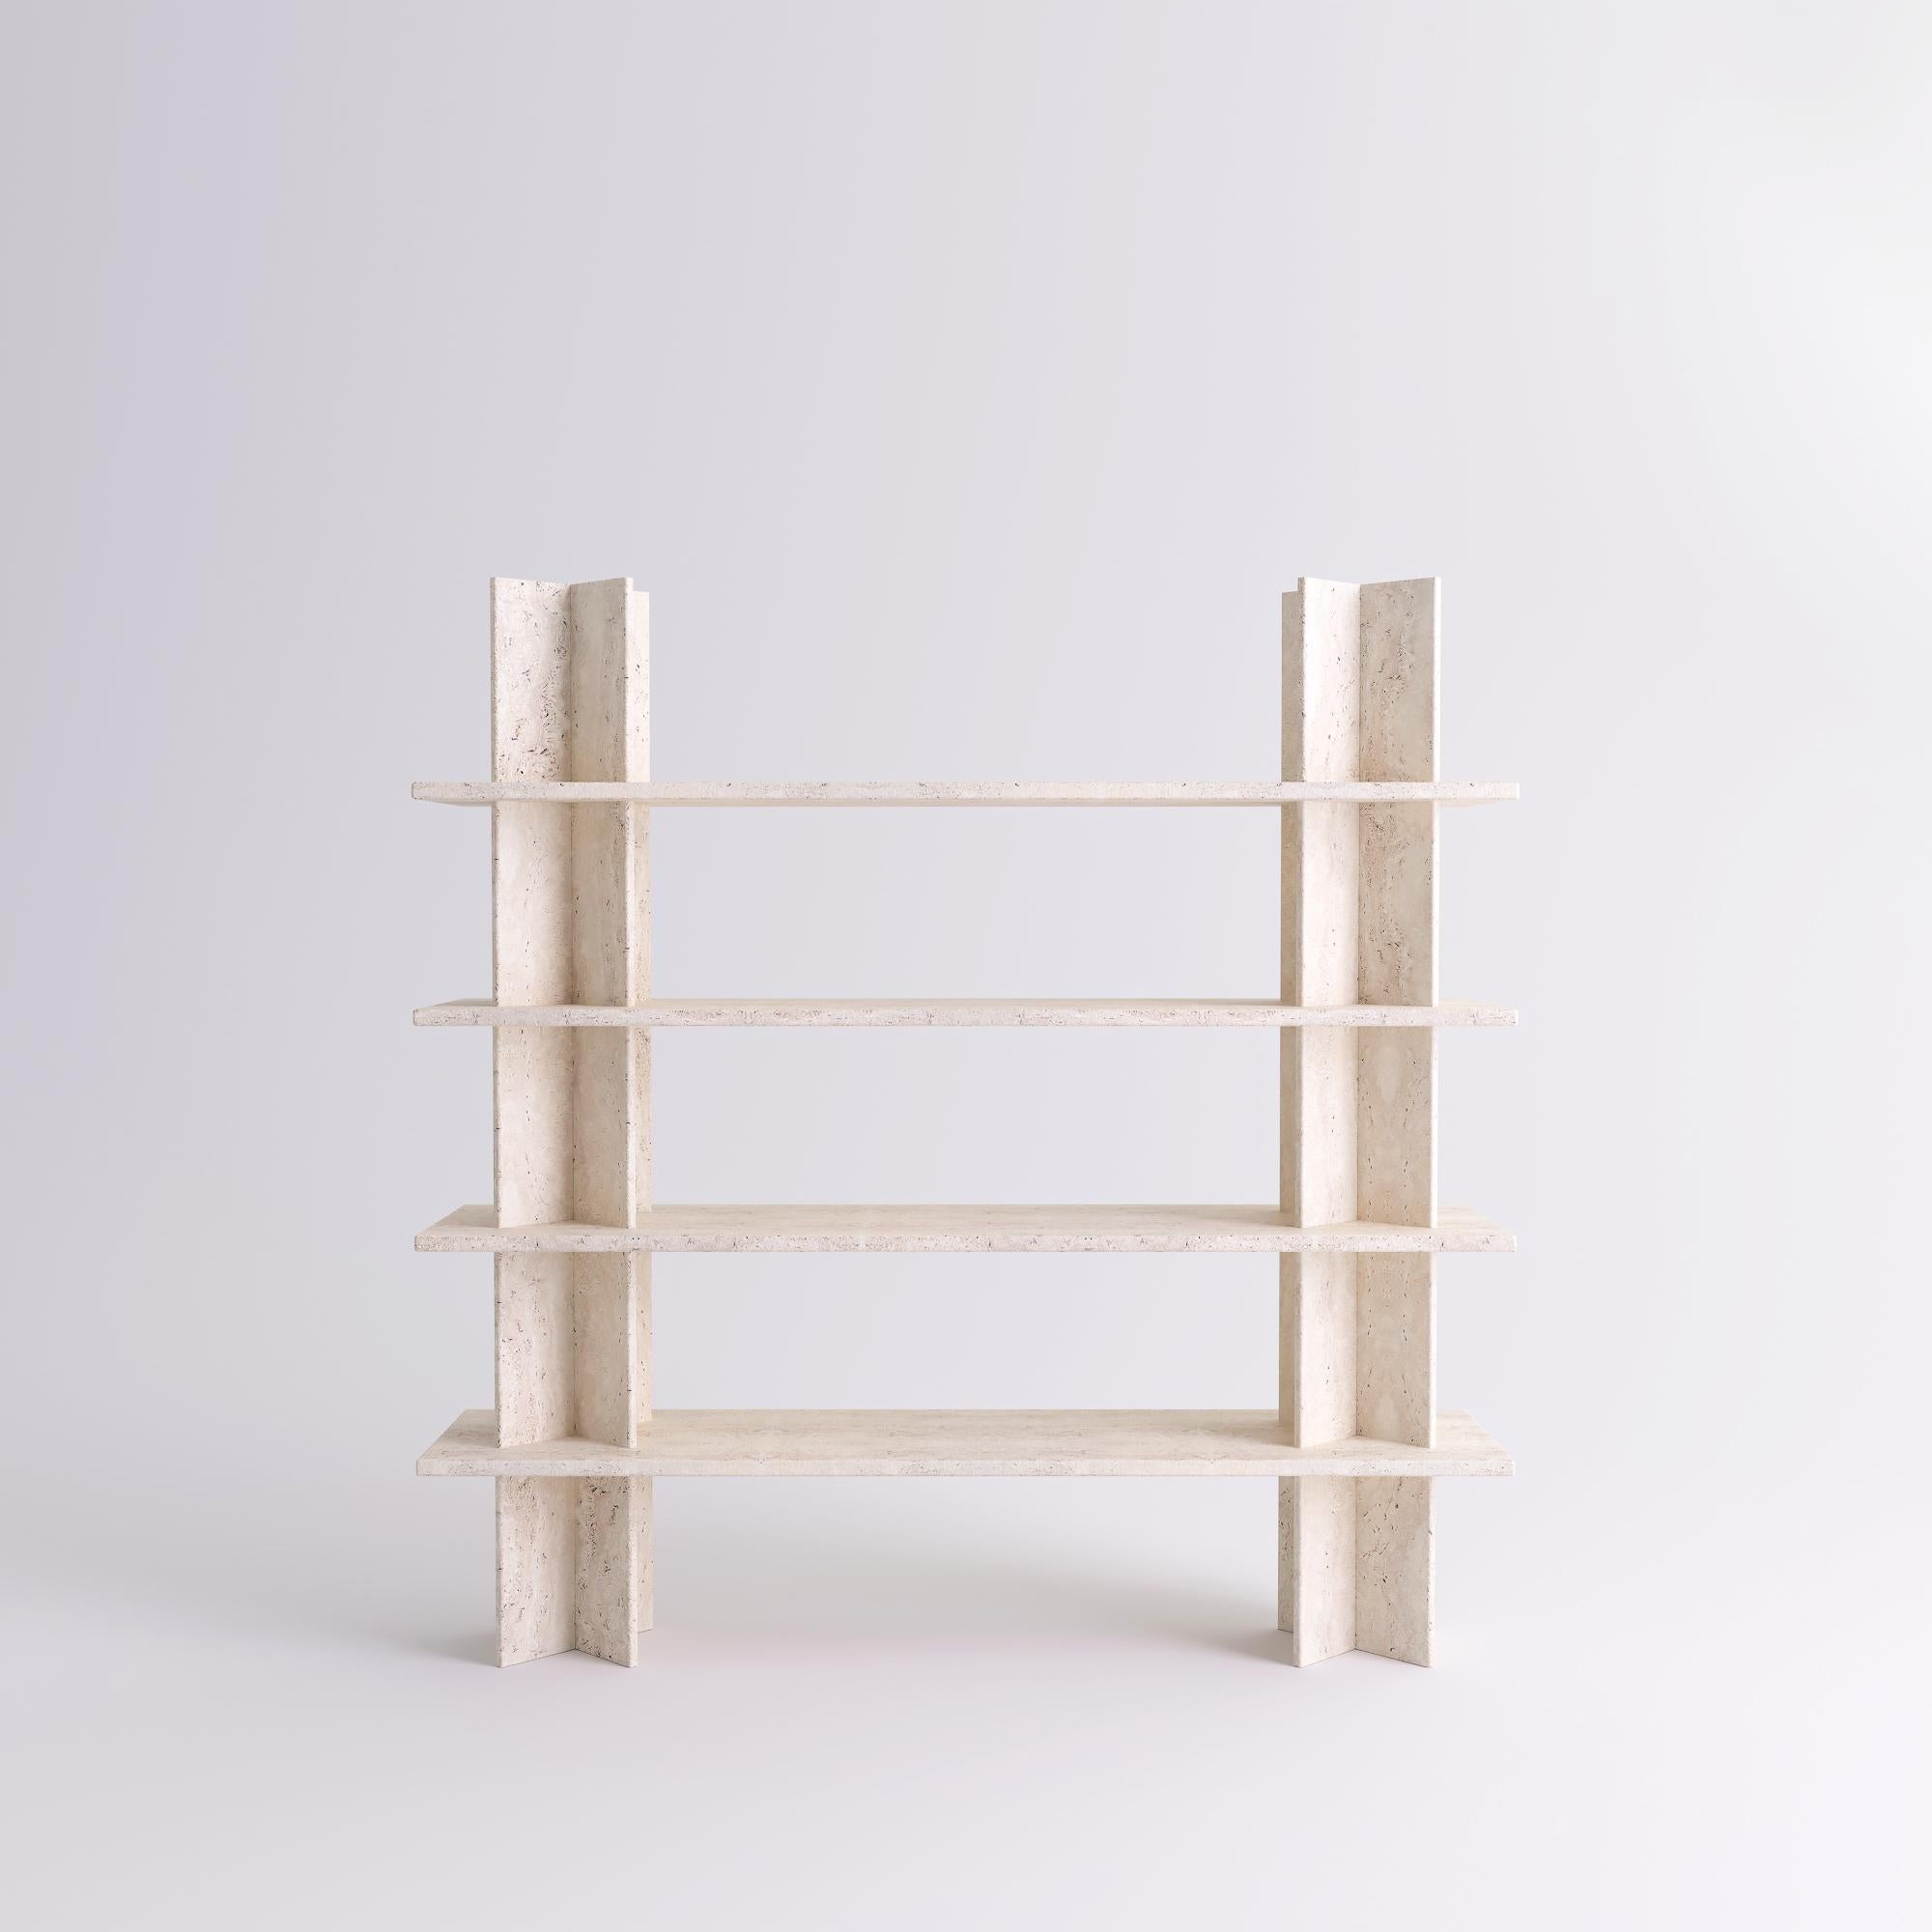 Monument Travertine shelves by Mathieu Girard & Gauthier Pouillart
Dimensions: L 195 x H 197
Materials: White travertine shelves and columns 
Material available: Birchwood, white marble, green marble, black marble, Pele de tigre marble,